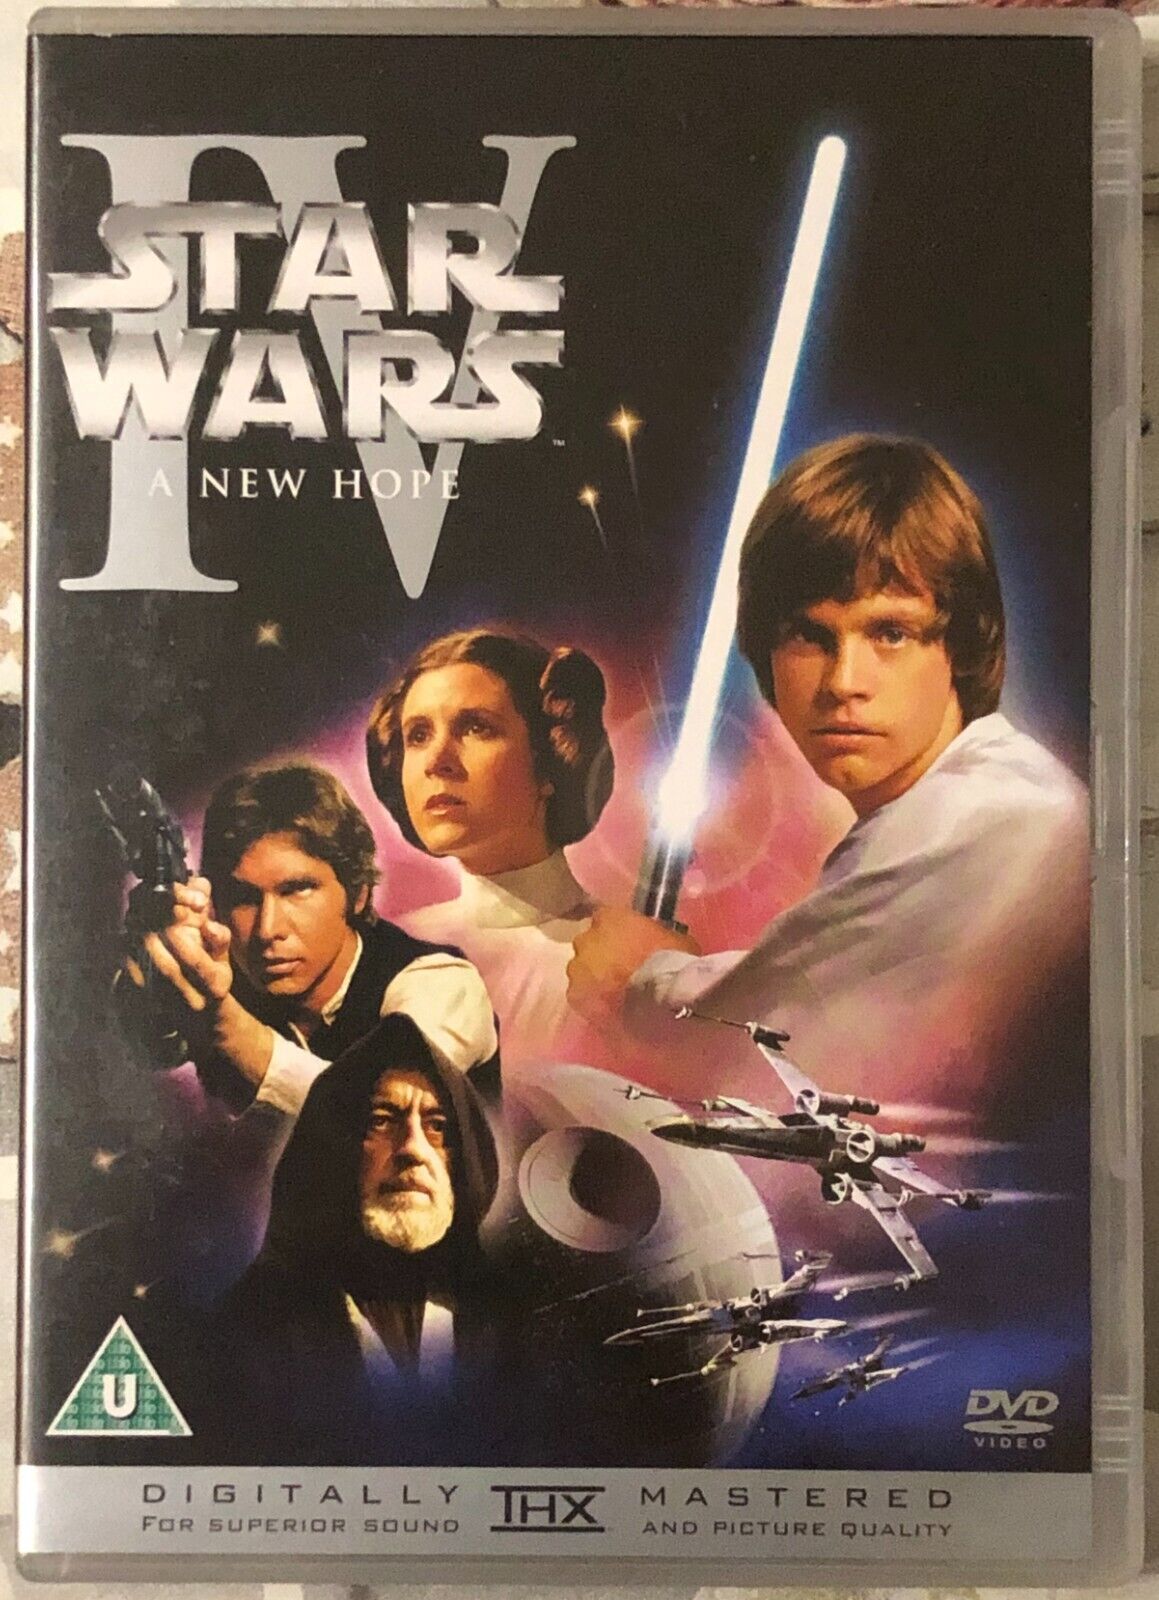  Star Wars: Episode IV ? A New Hope DVD di George Lucas, 1977, 20th Century F